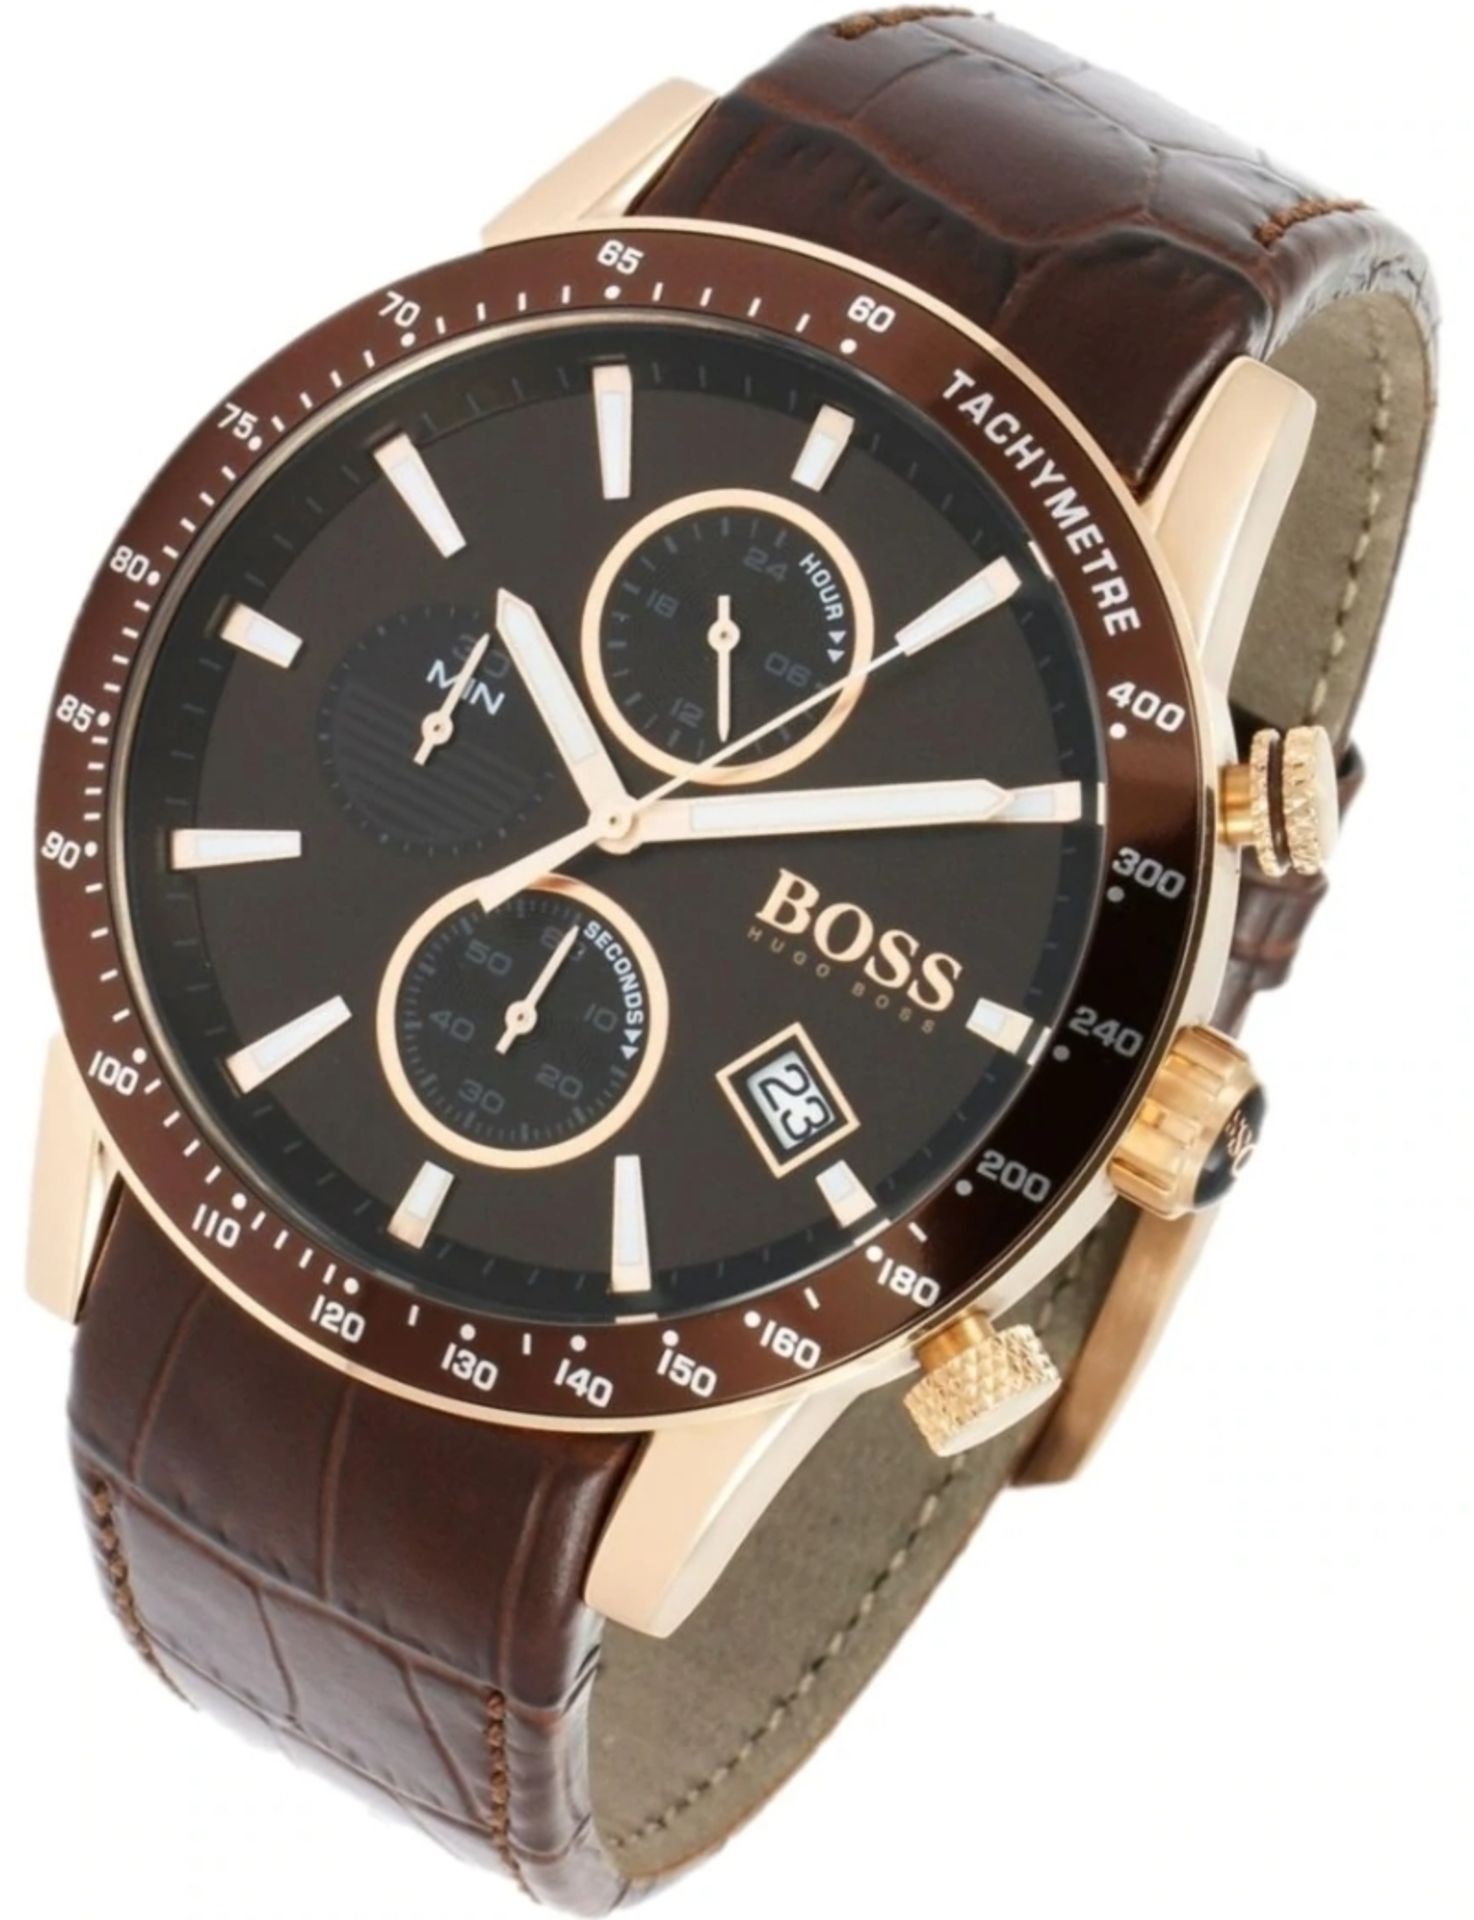 Hugo Boss 1513392 Men's Rafale Brown Leather Strap Chronograph Watch - Image 6 of 7